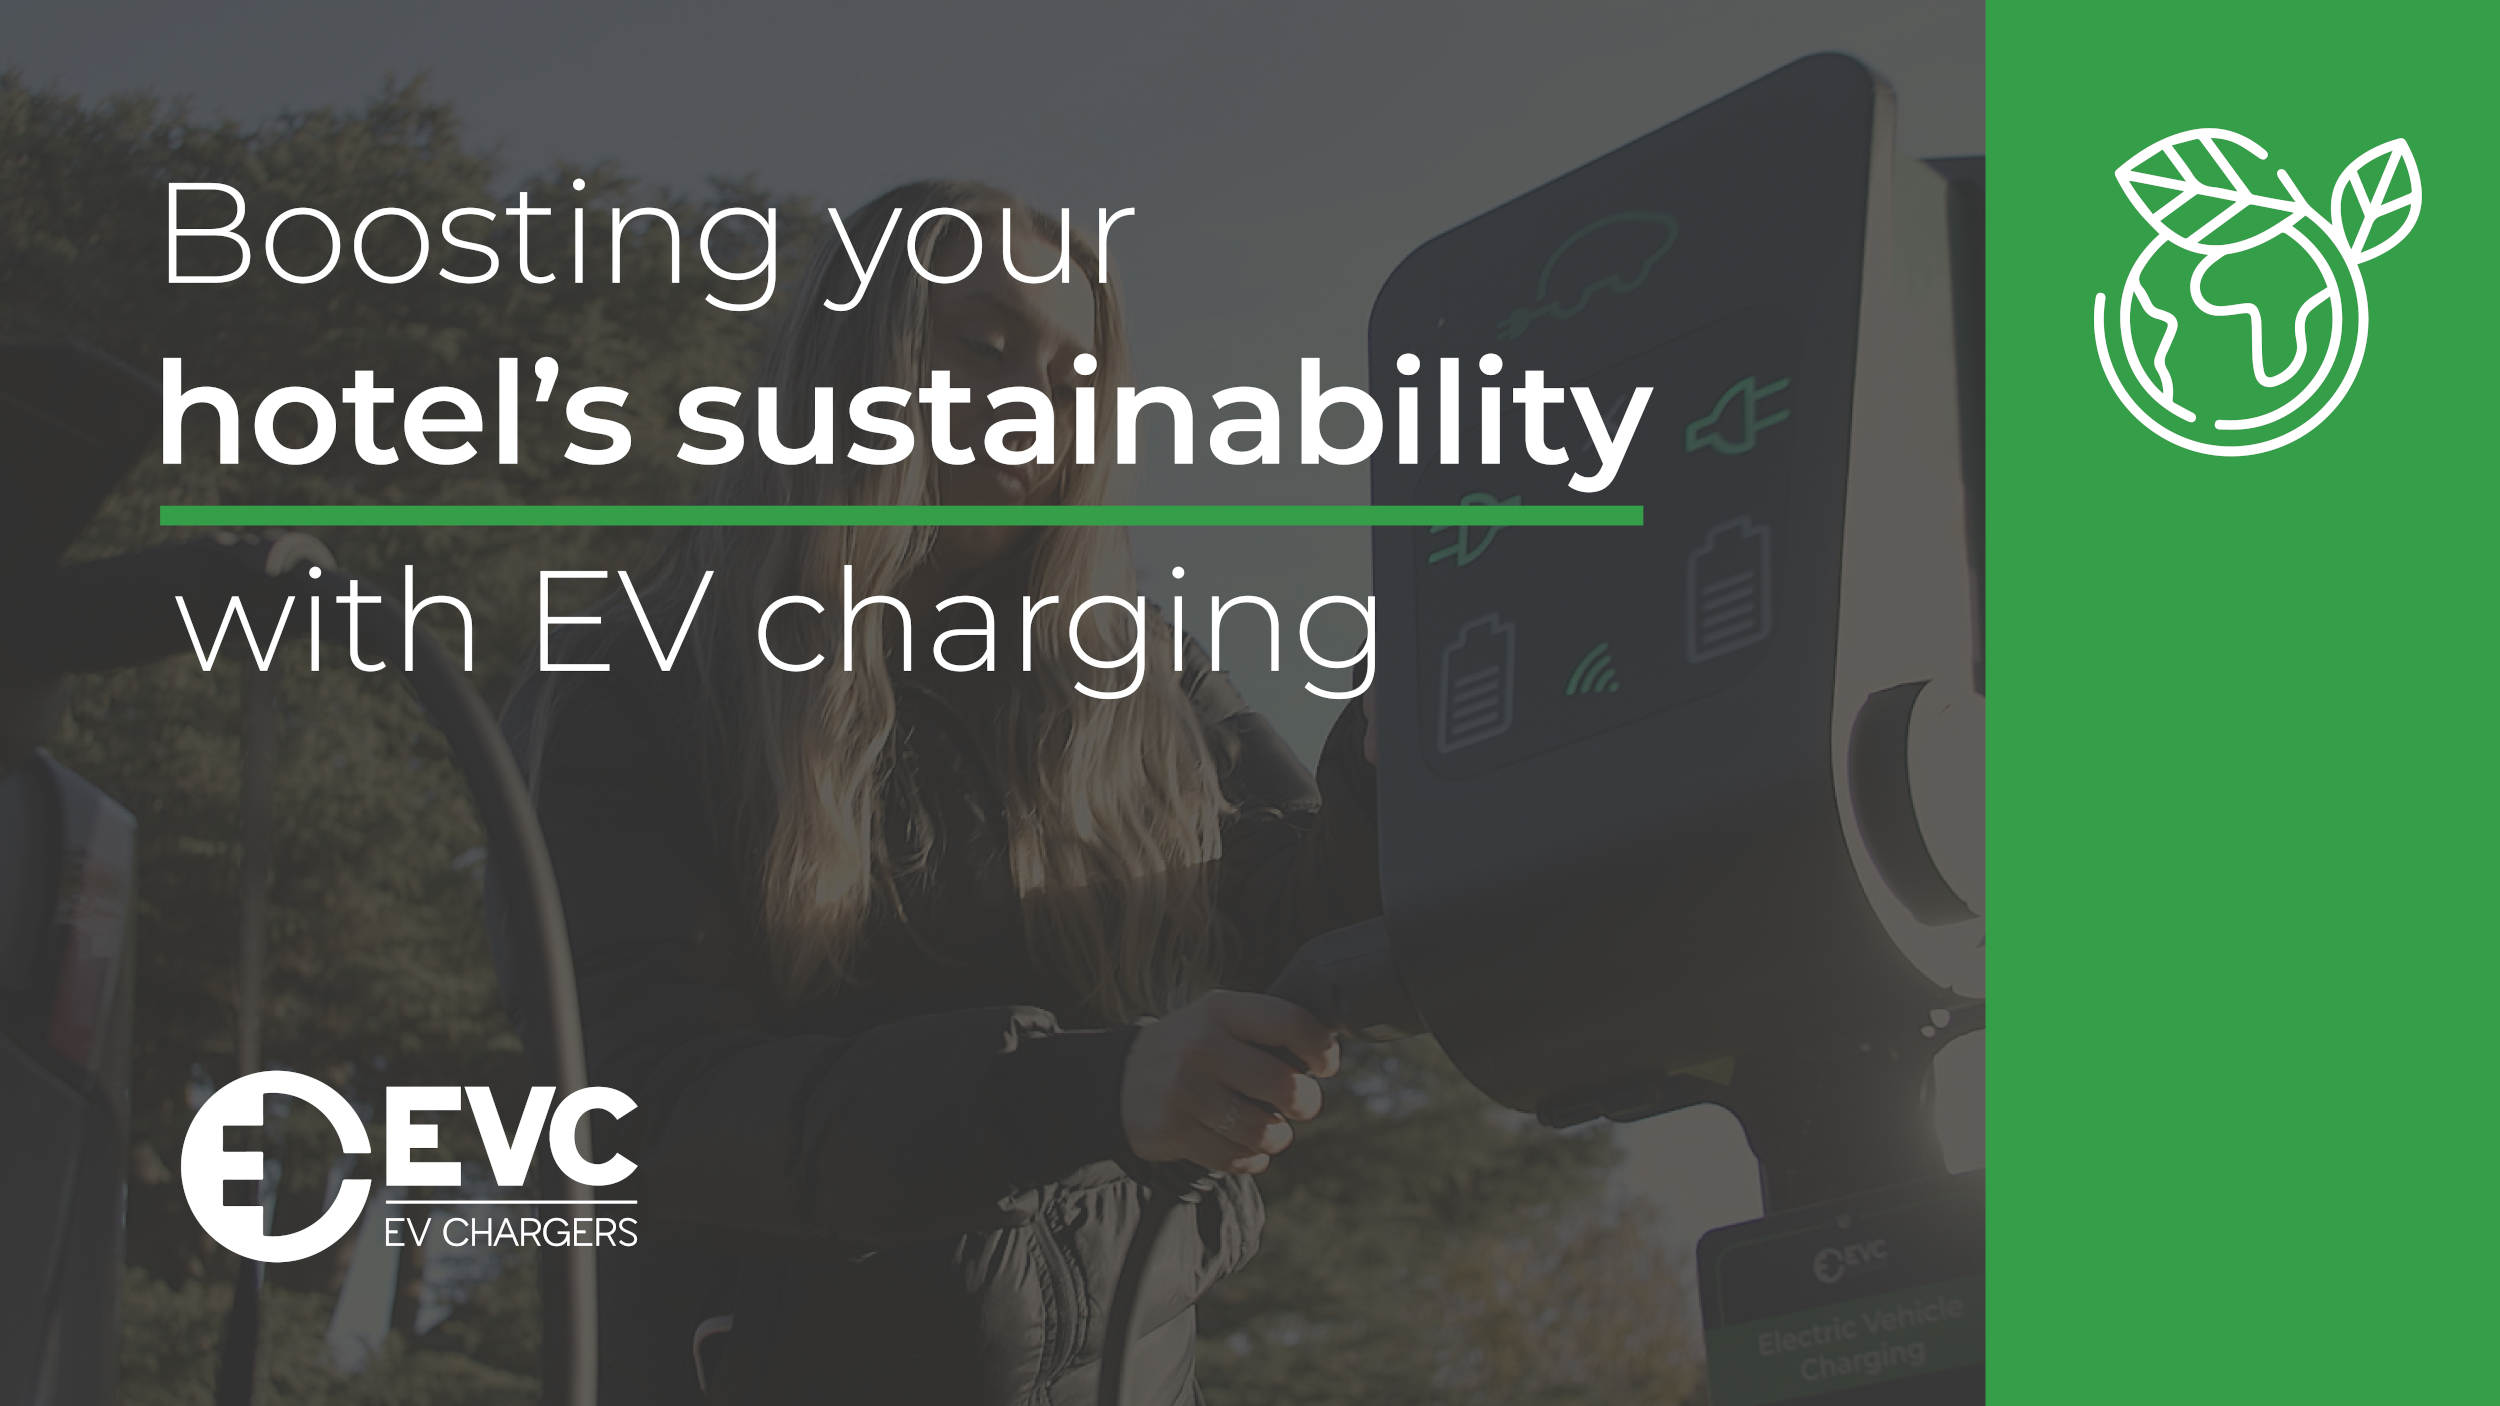 Boosting your hotel’s sustainability with EV charging